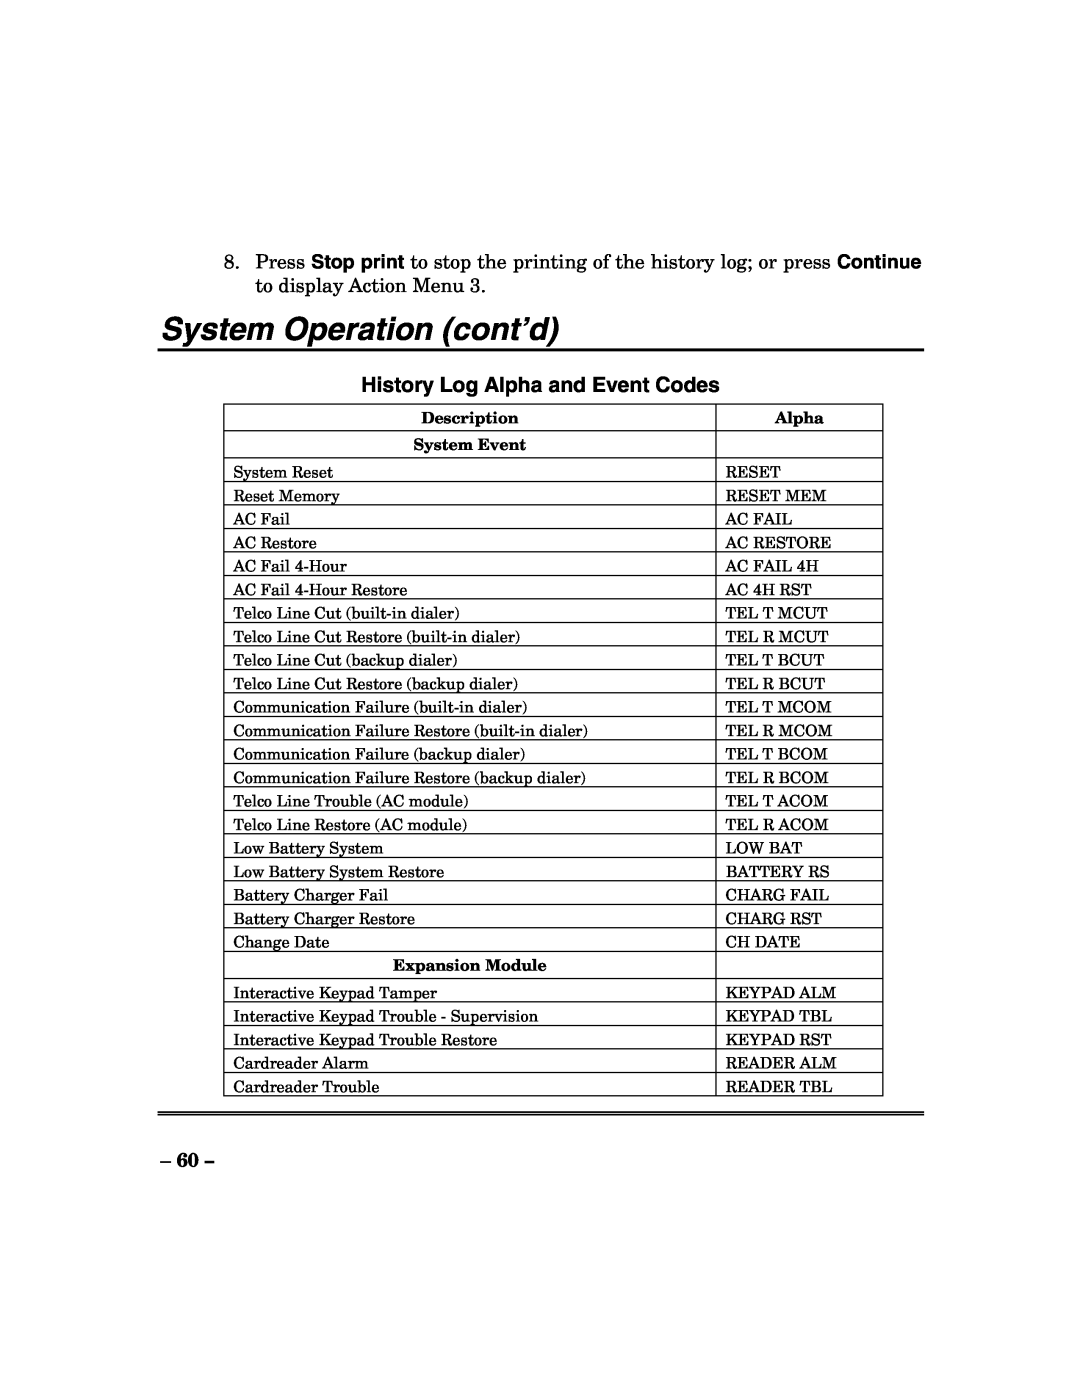 ADT Security Services 200 Plus manual History Log Alpha and Event Codes, System Operation cont’d, Description, System Event 